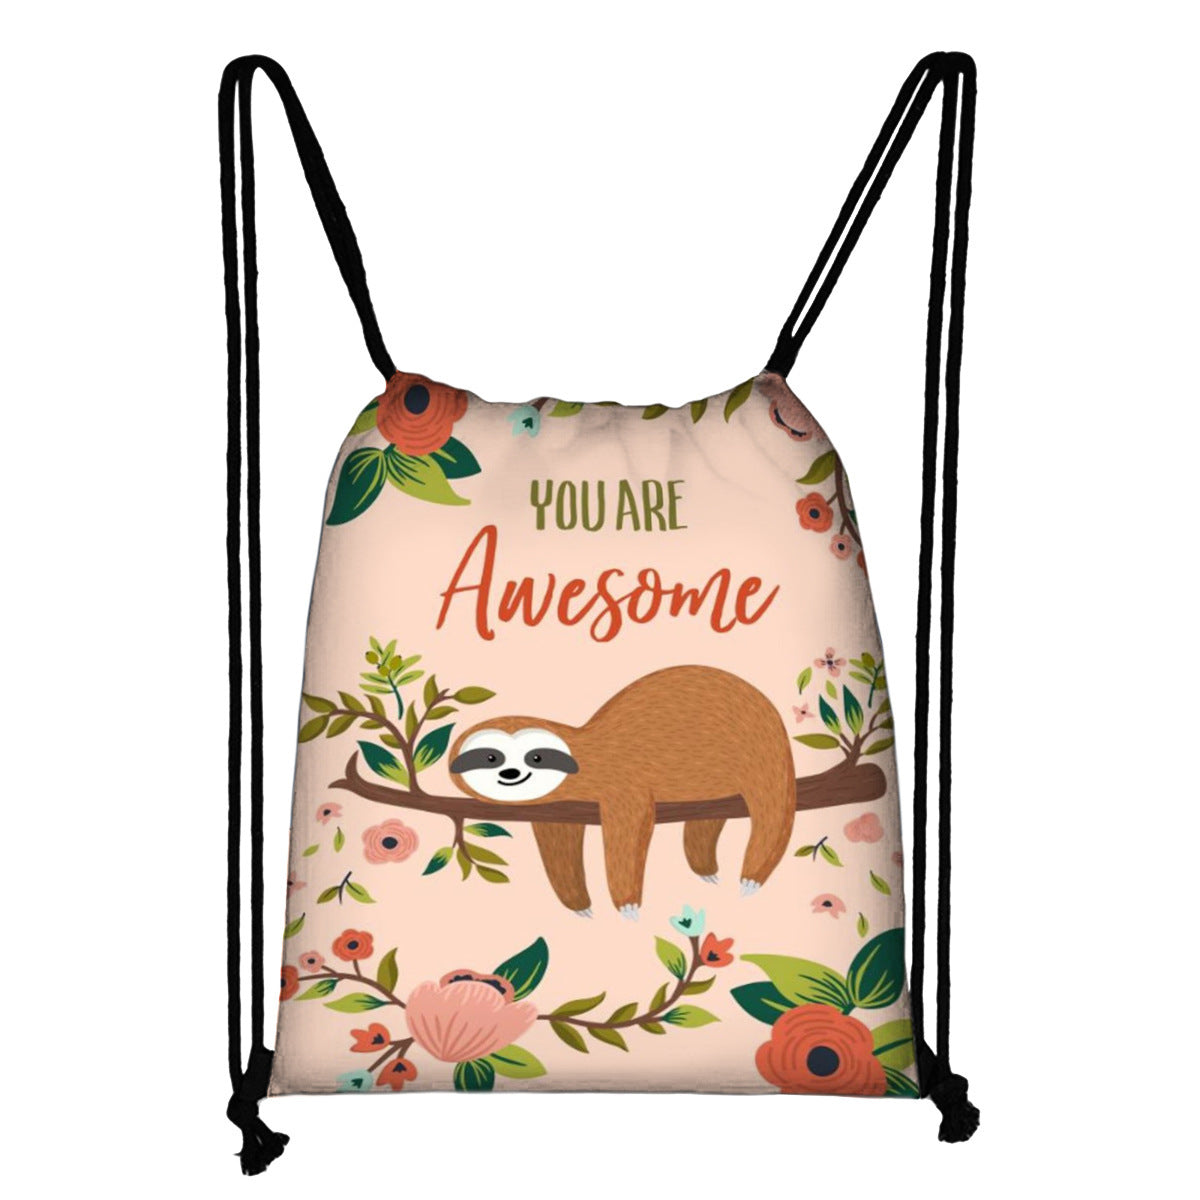 Drawstring Bag With Drawstring Mouth Polyester Backpack For Outdoor Use